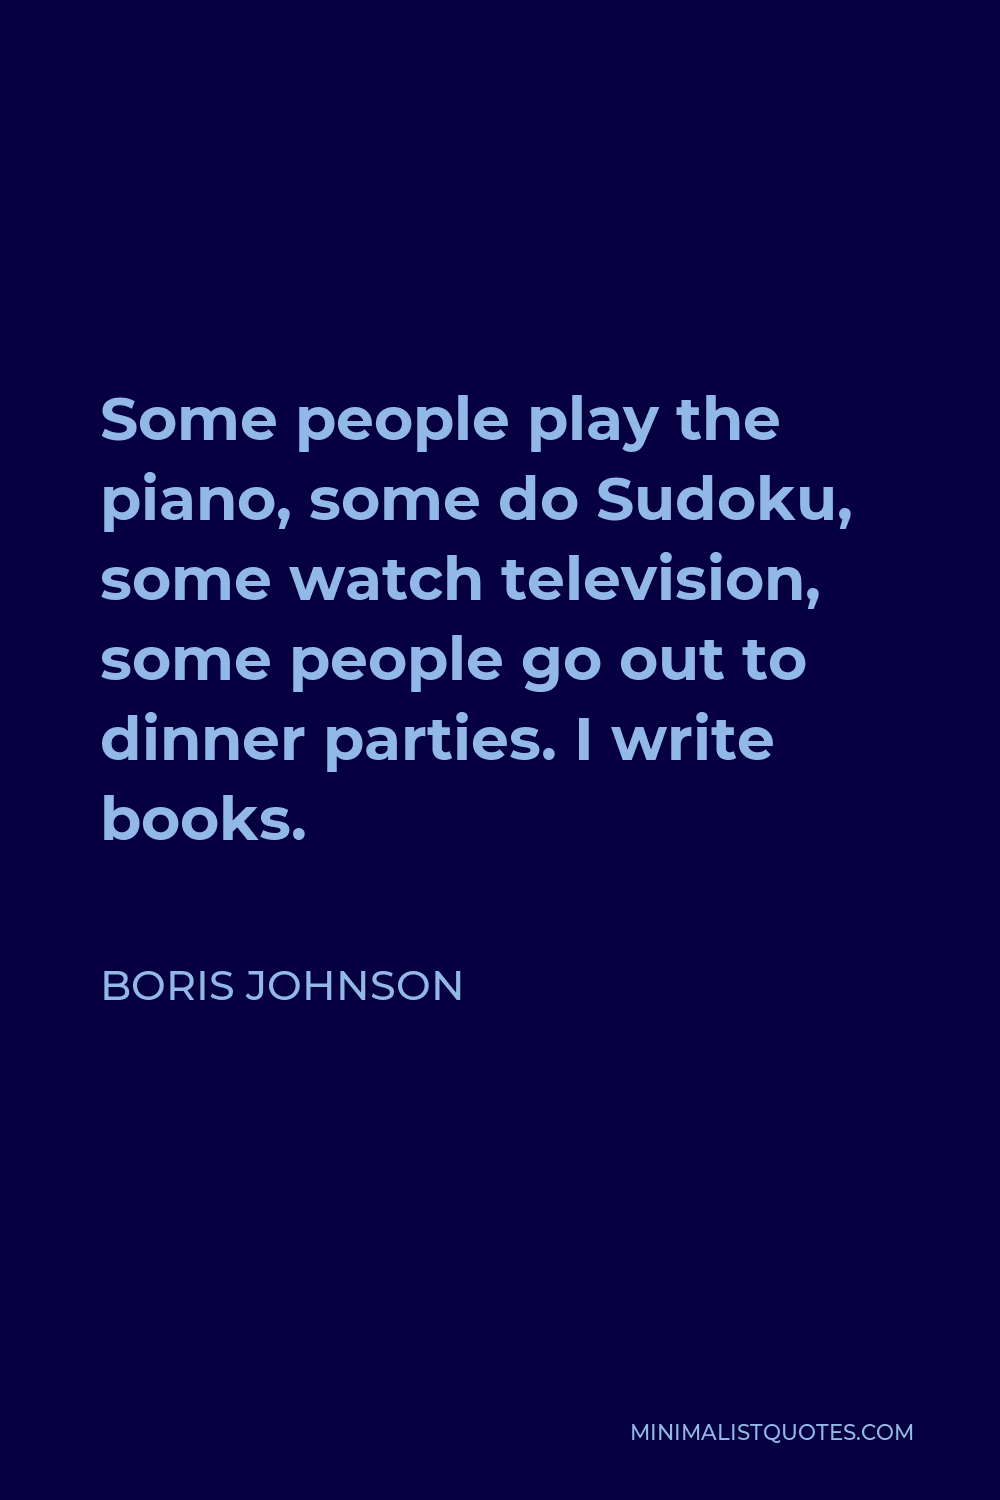 Boris Johnson Quote - Some people play the piano, some do Sudoku, some watch television, some people go out to dinner parties. I write books.